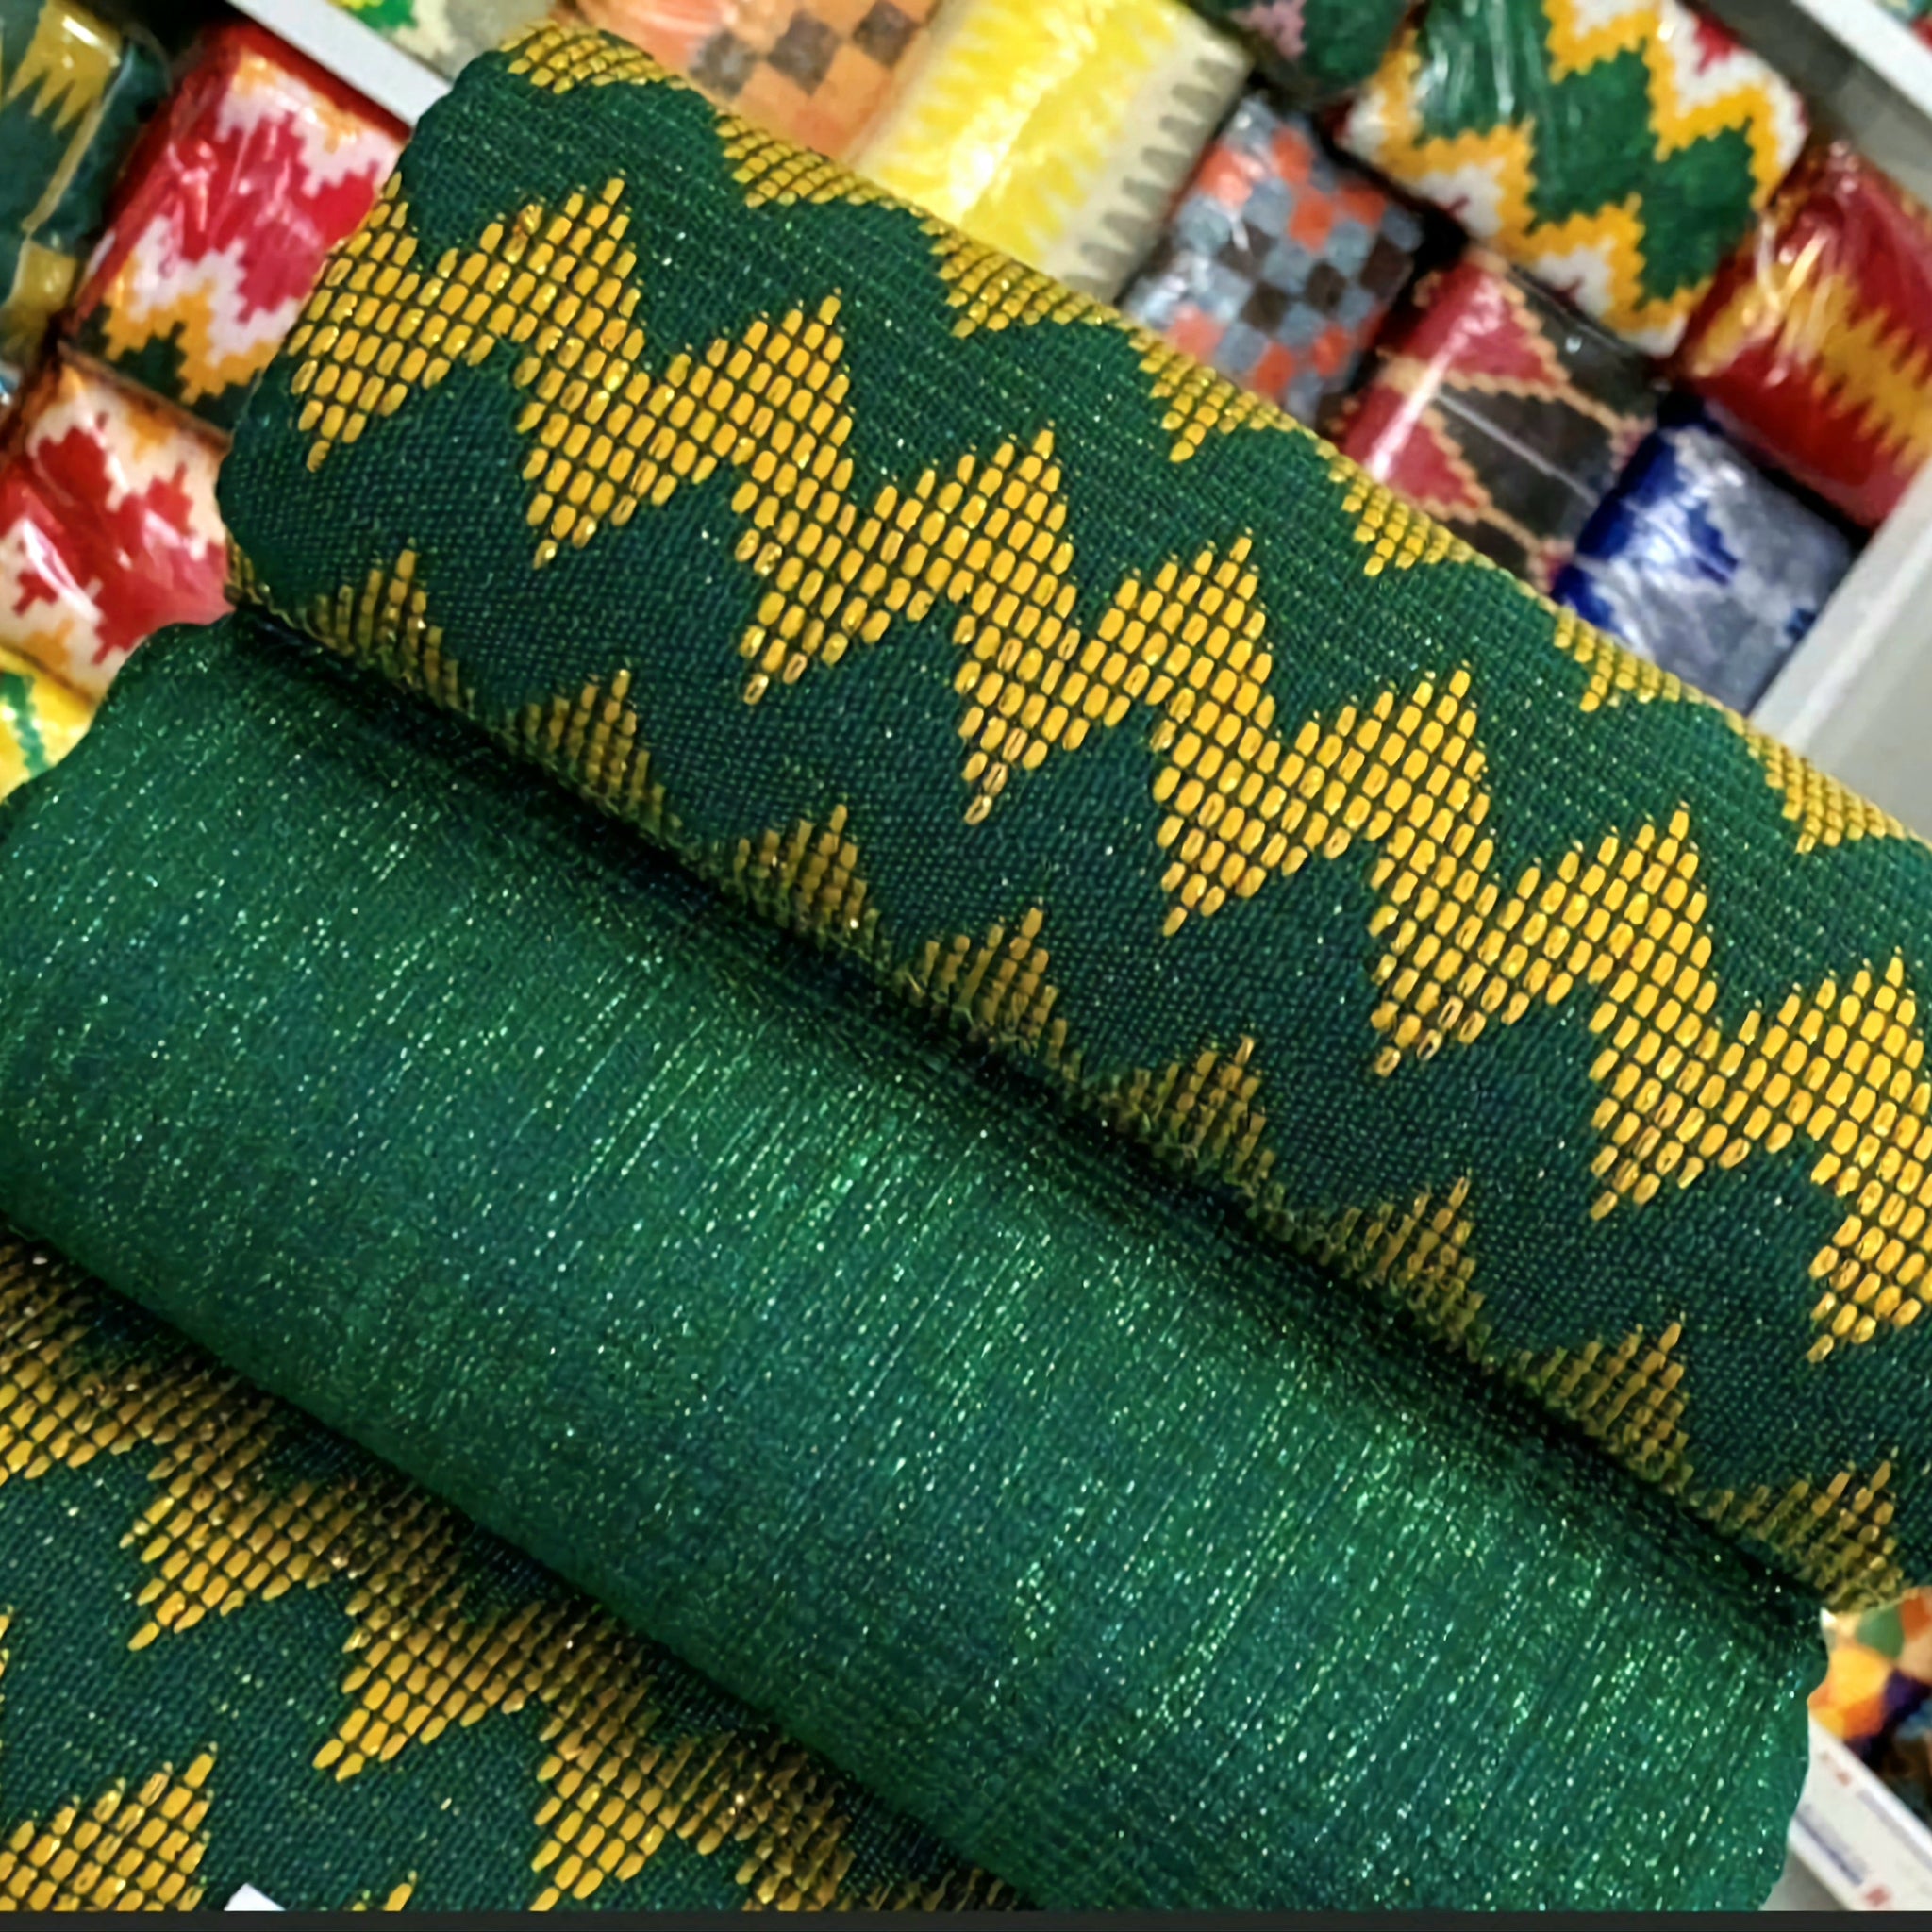 MG Authentic Hand Weaved Kente Cloth A4015